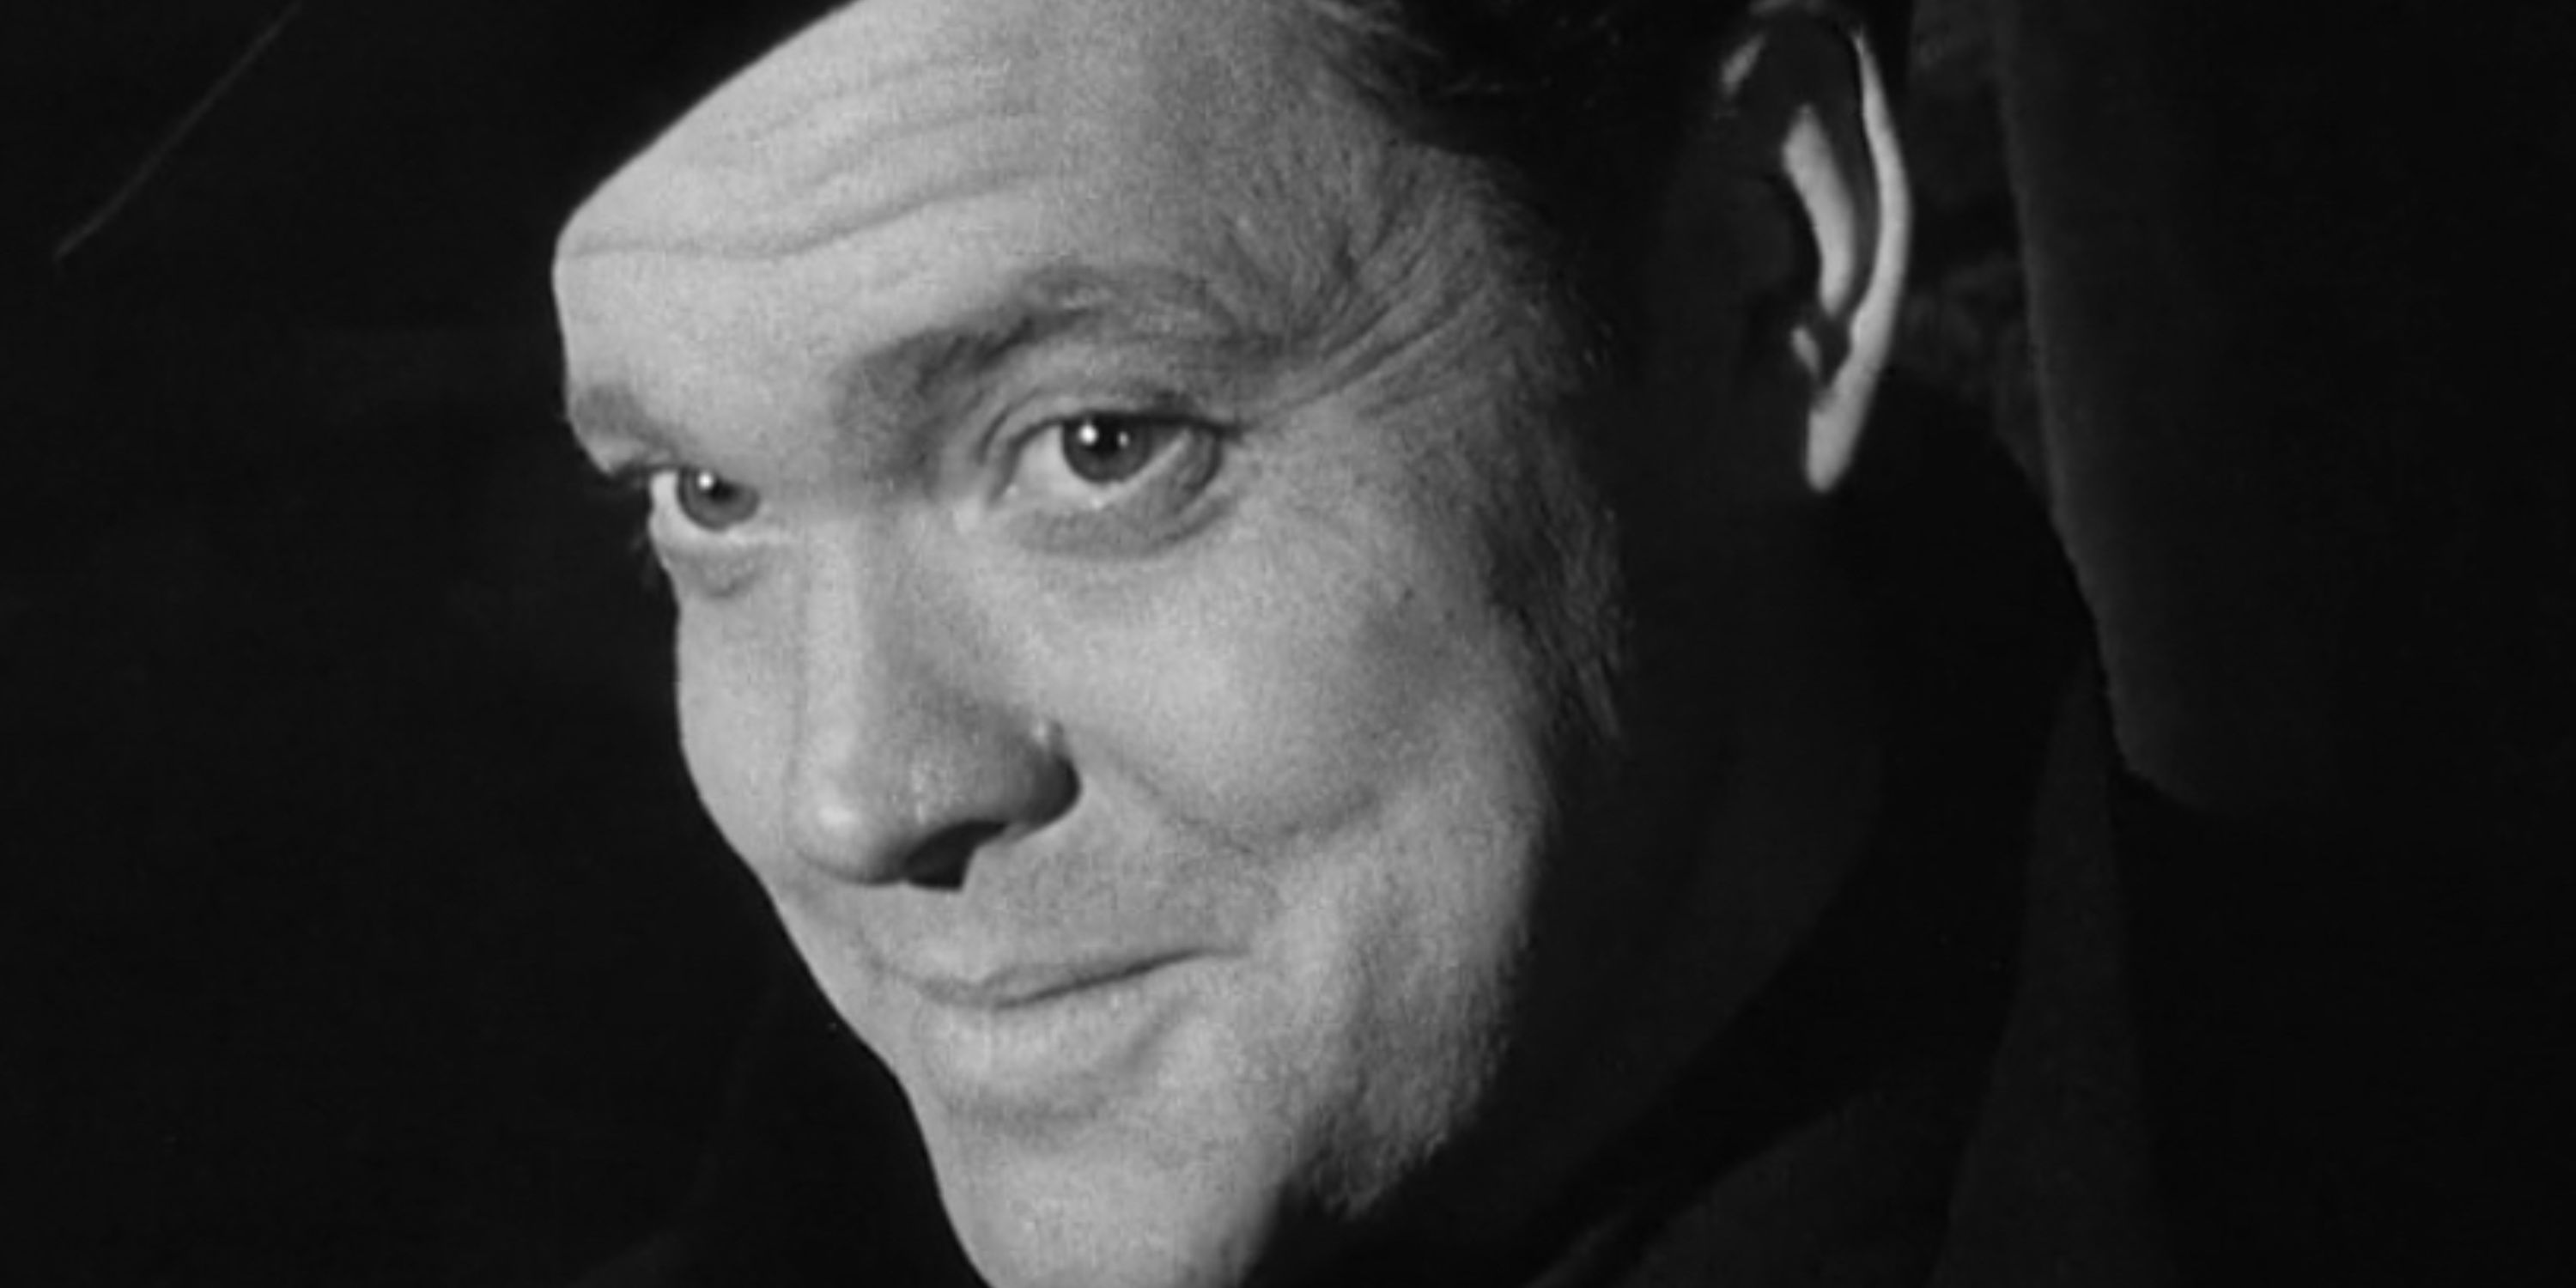 Orson Welles as Harry Lime smiling coyly in 'The Third Man' (1949)